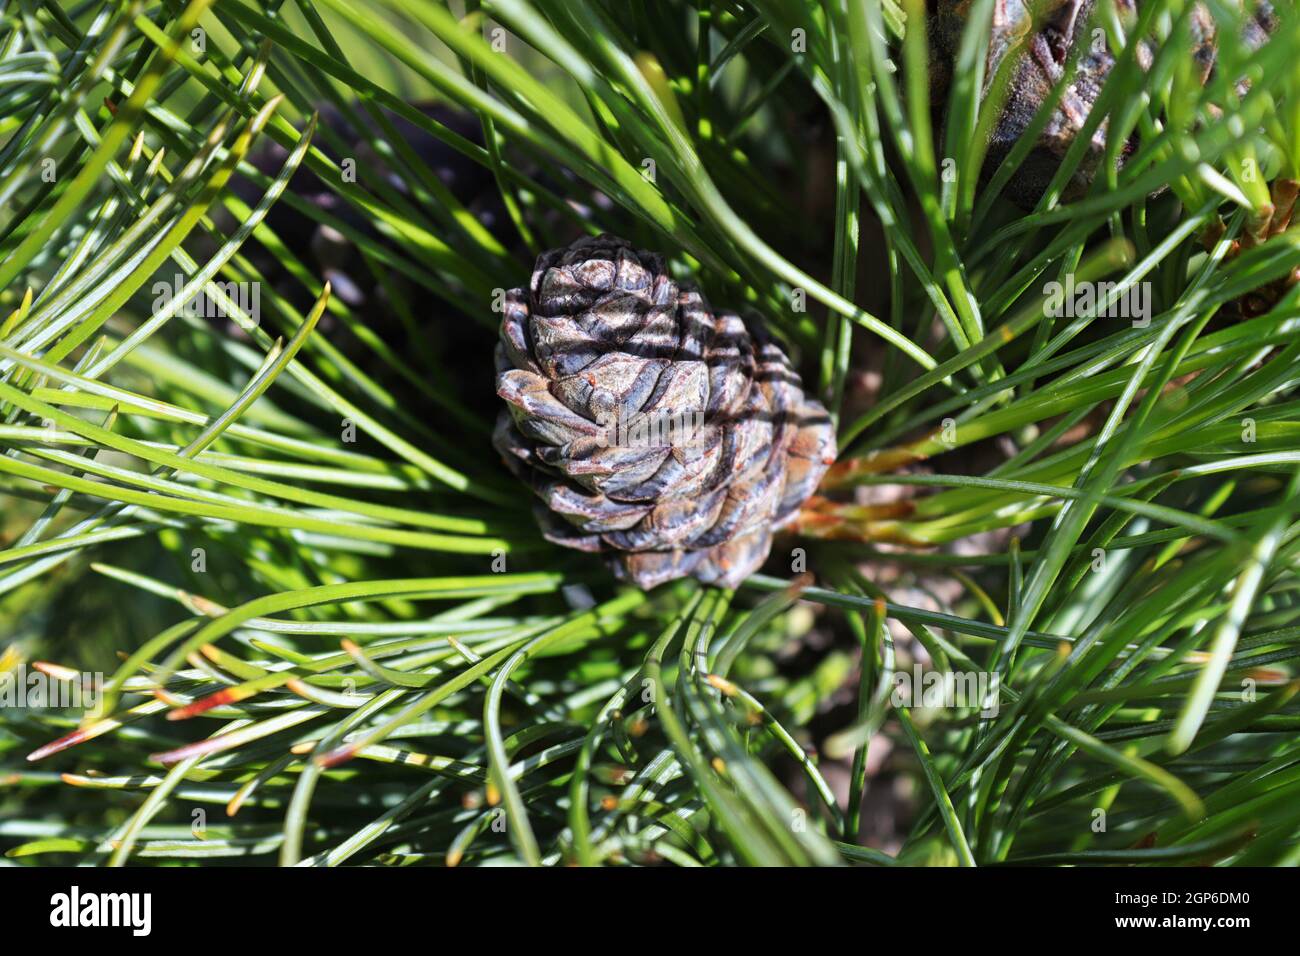 An older but closed pine cone on a branch. Stock Photo